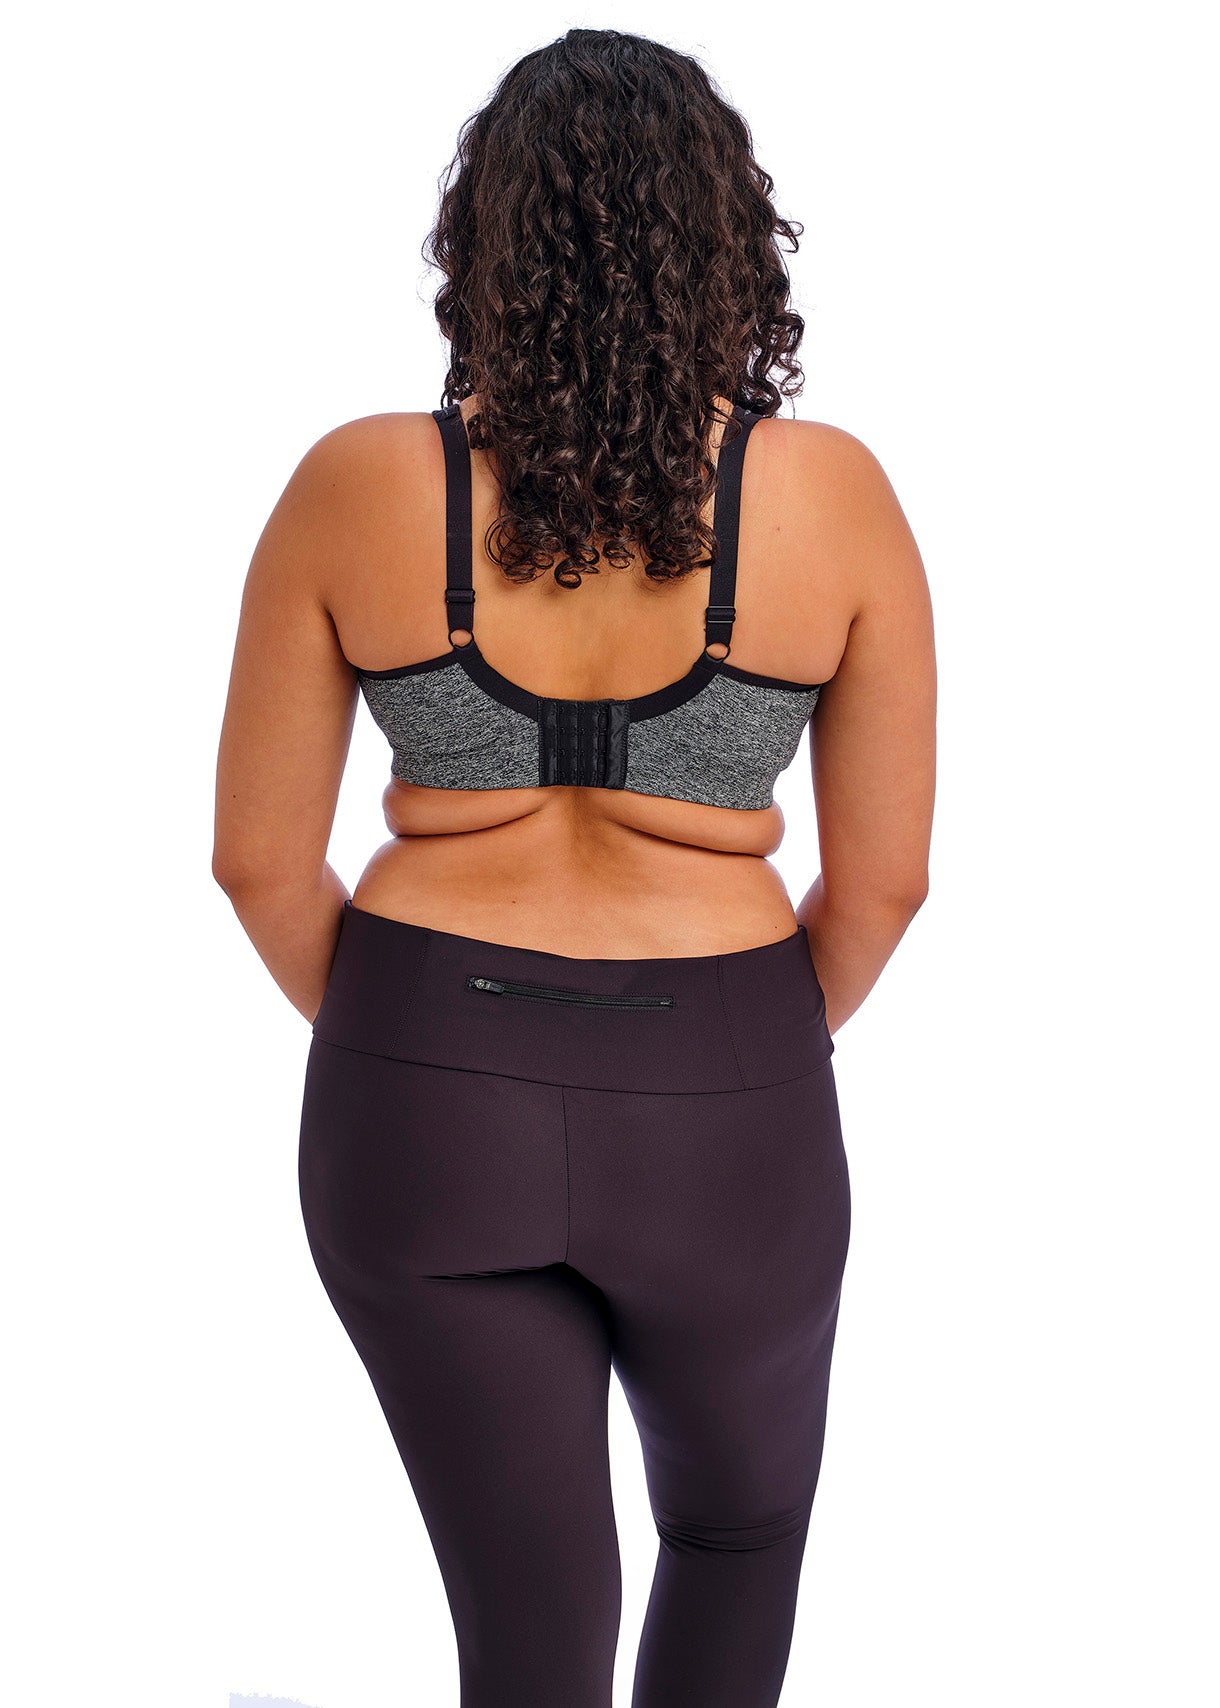 Goddess Sport GD6910 Non-wired Soft Cup Sports Bra Black (BLK) 34 G CS for  sale online